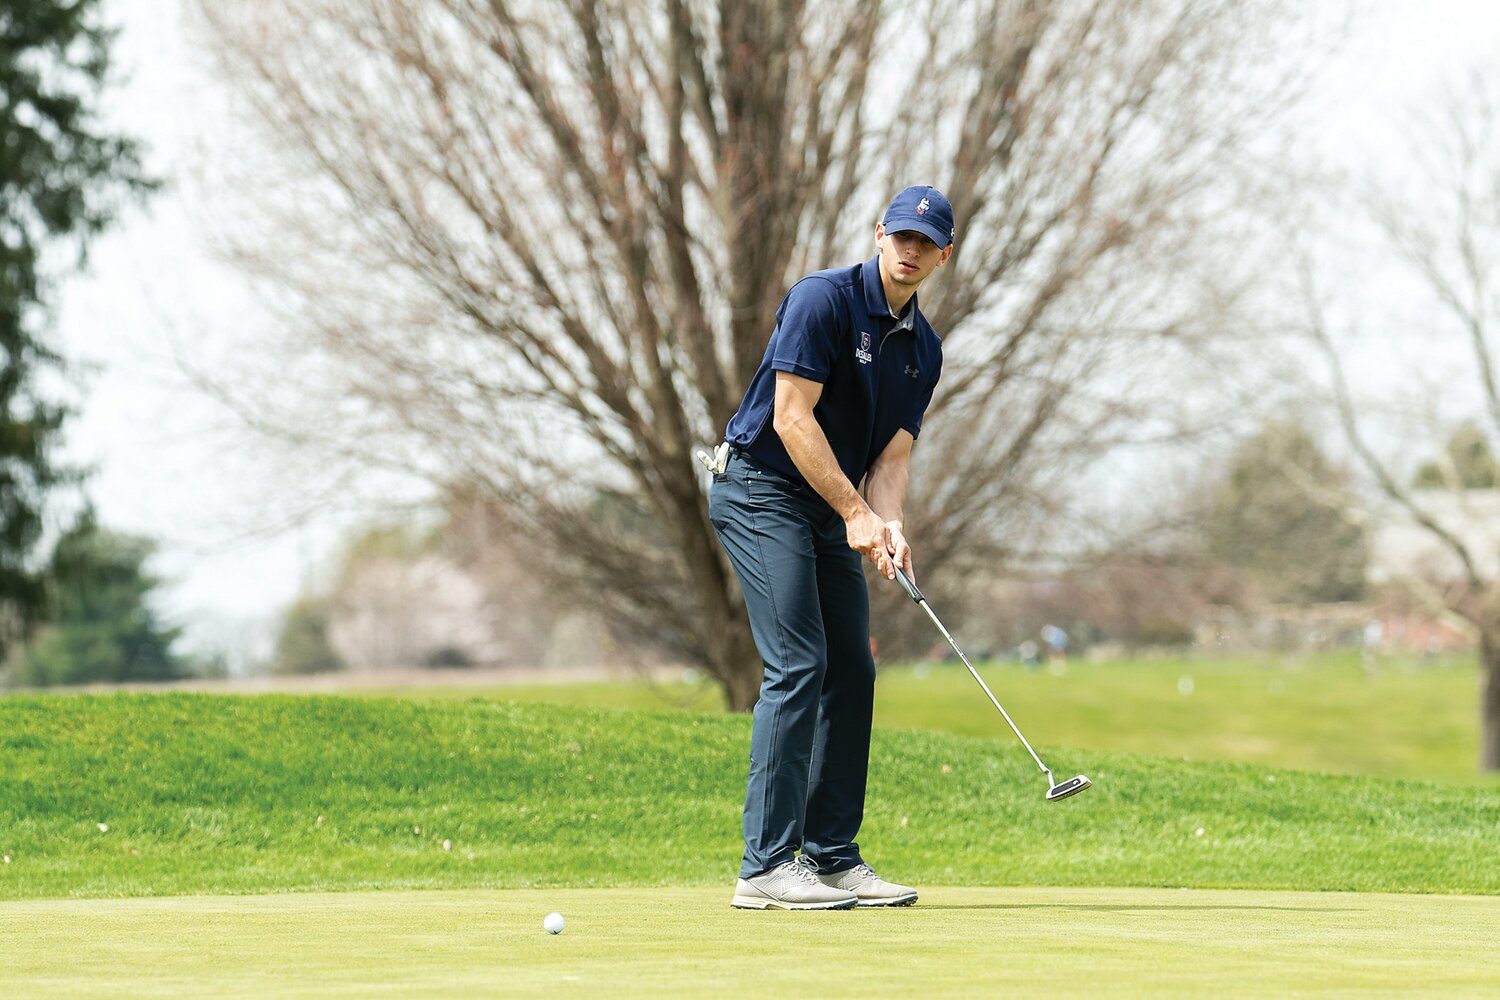 DeSales senior Christian Guldin carded a team best 79 in a dual match with DelVal last March.